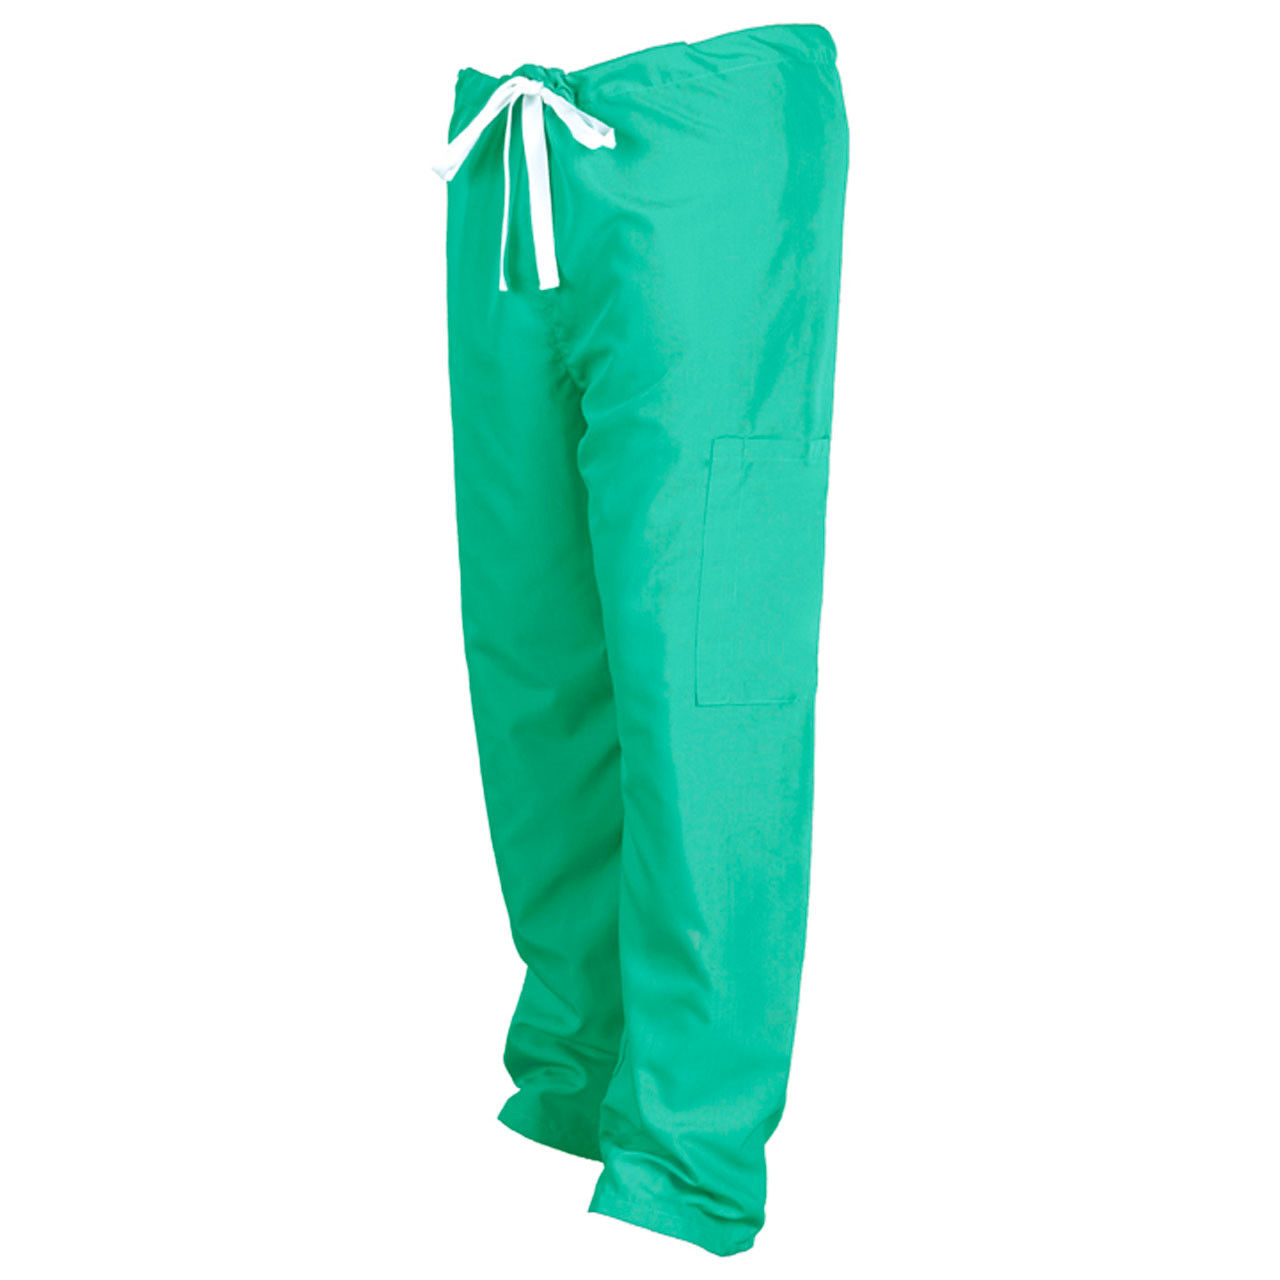 What sizes are available for the cargo scrub pants?